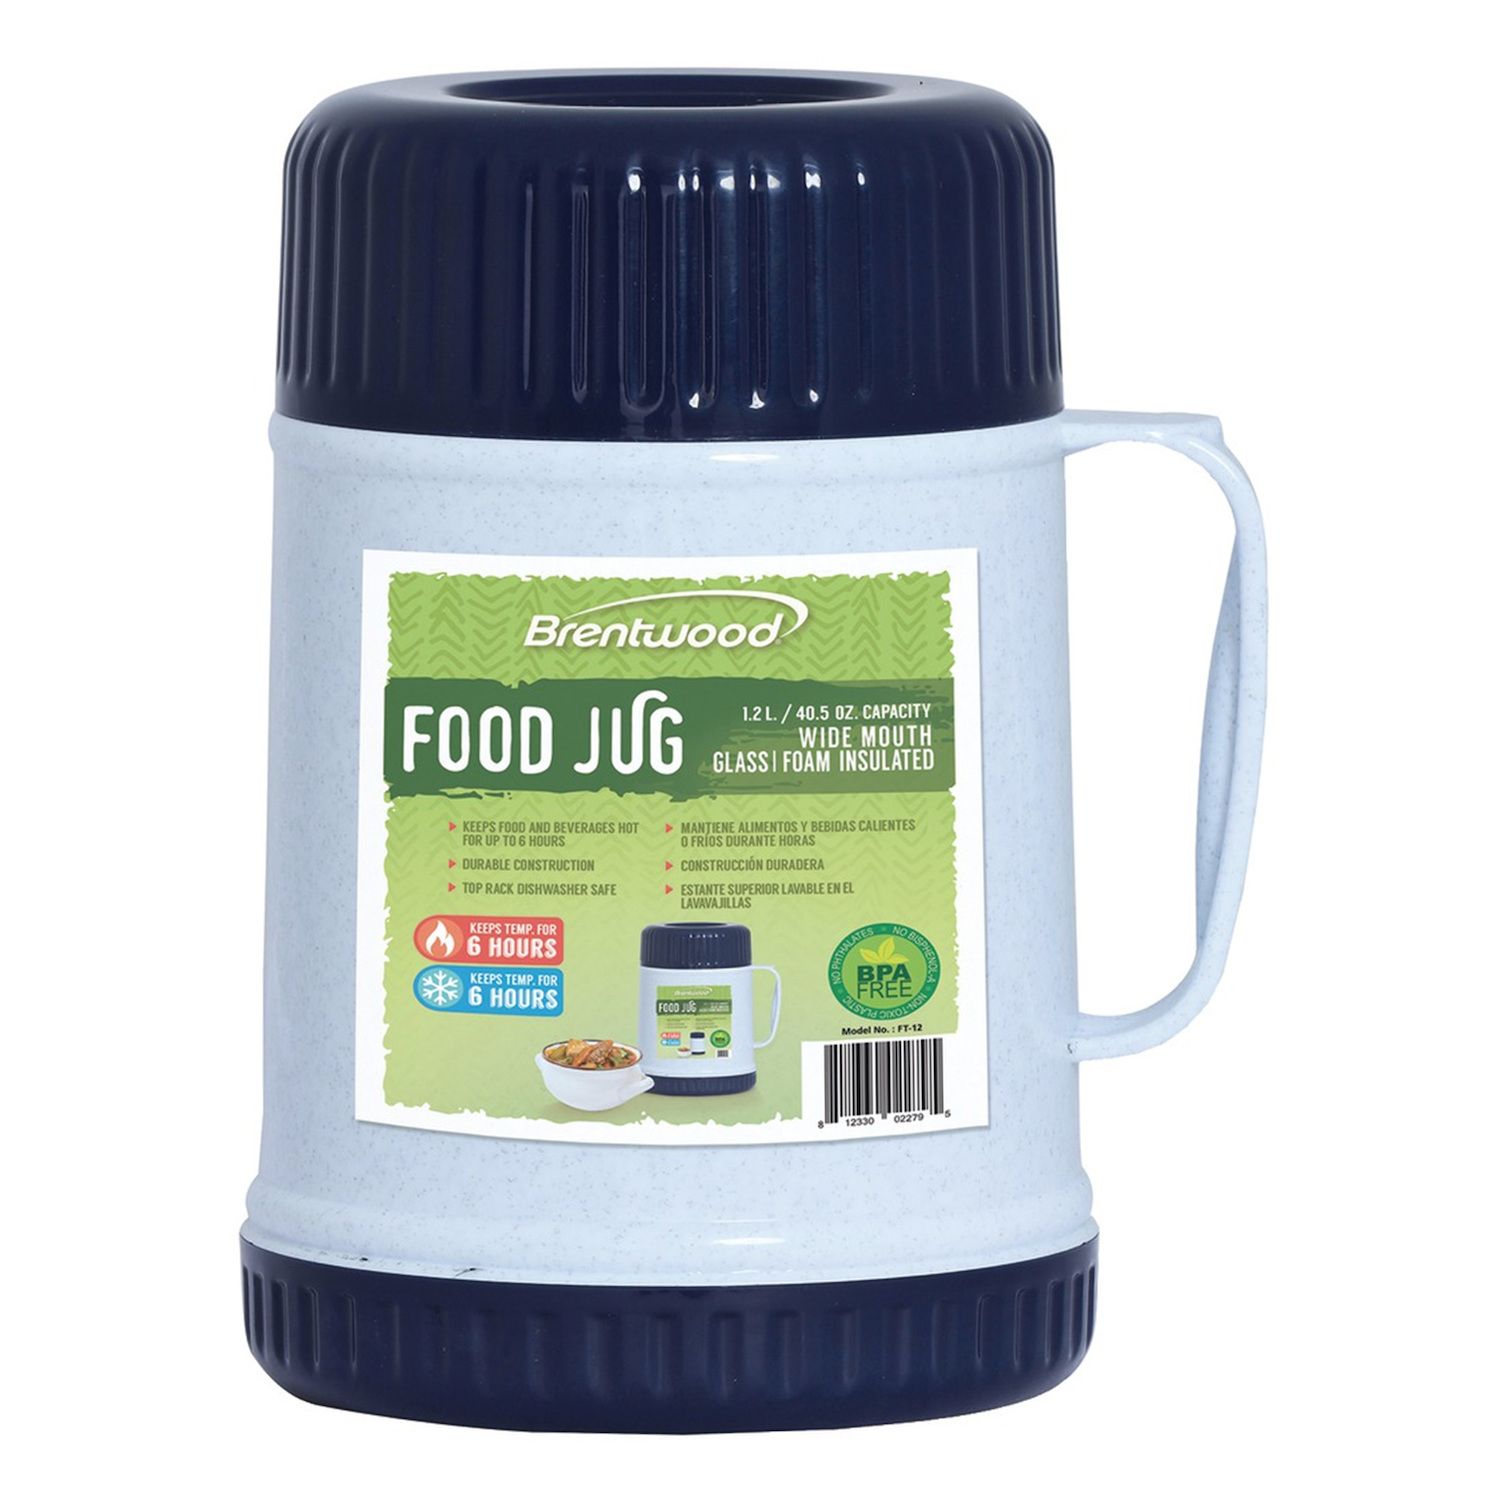 Thermos Glass Wide-mouth Food Jar with Folding Spoon, 16 oz, Blue